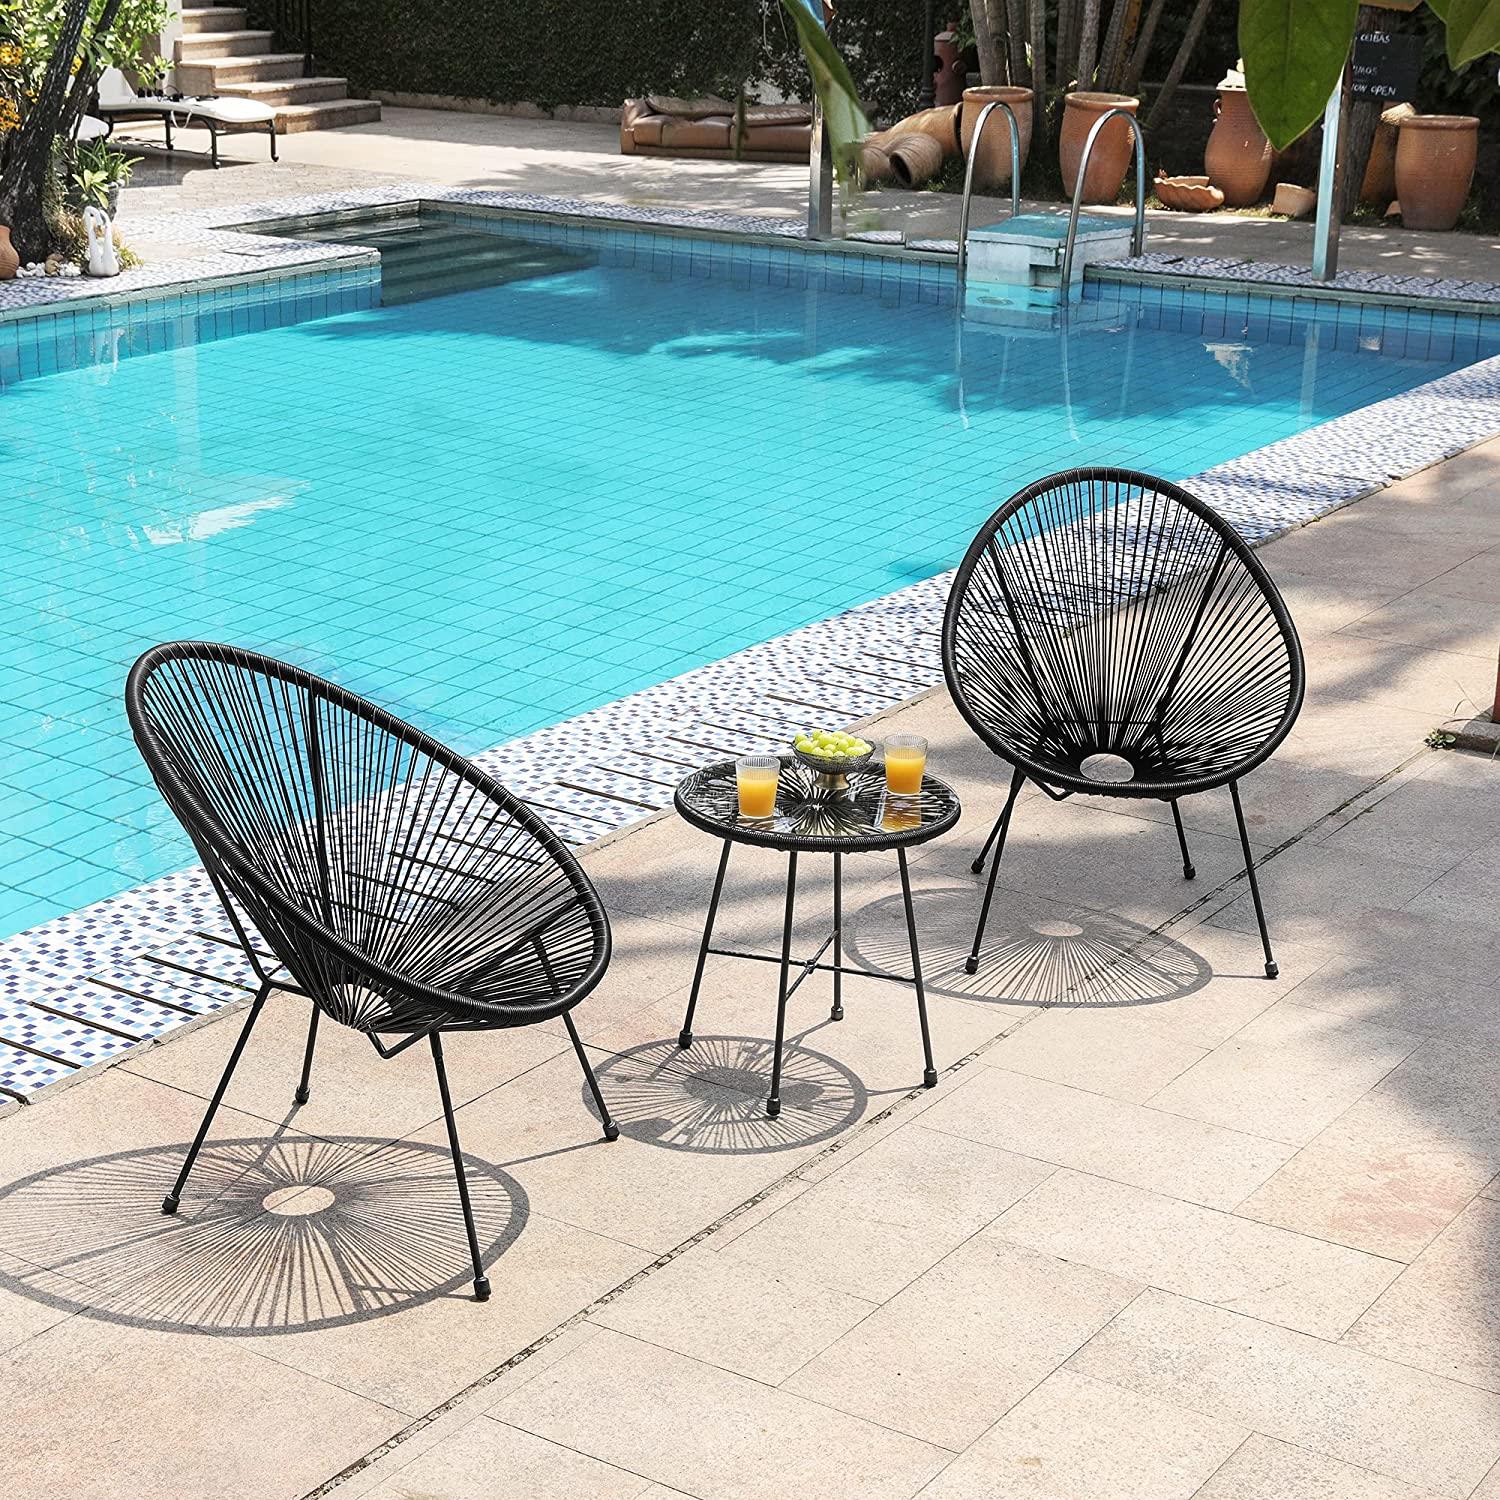 How to maintain Rattan Chair